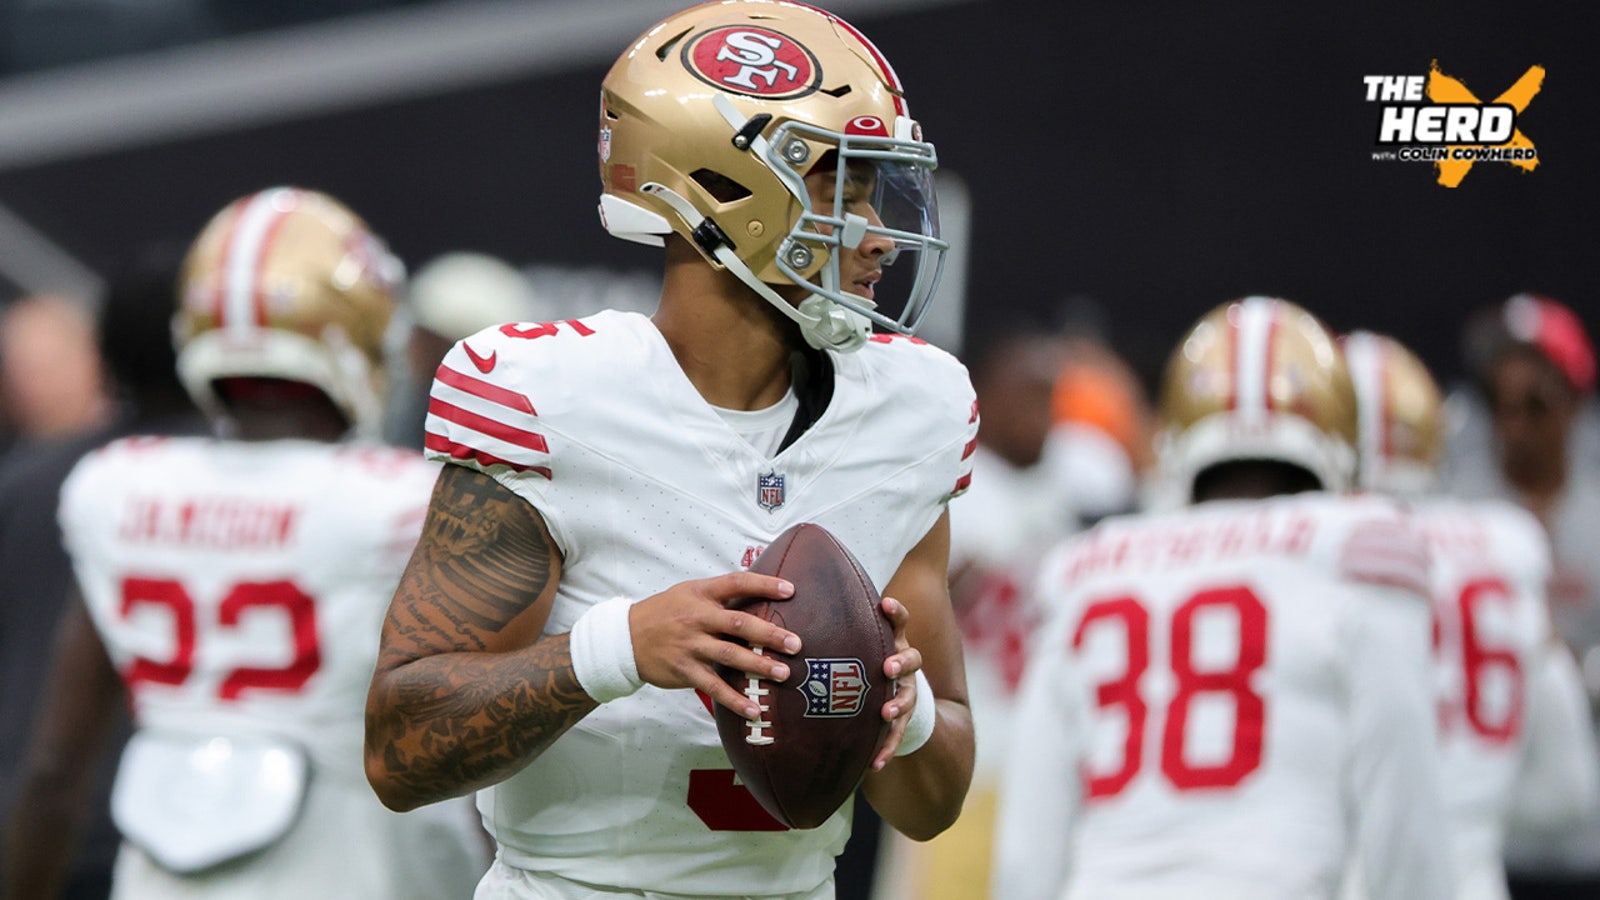 Former NFL scout says 49ers QB Trey Lance is "fool's gold"